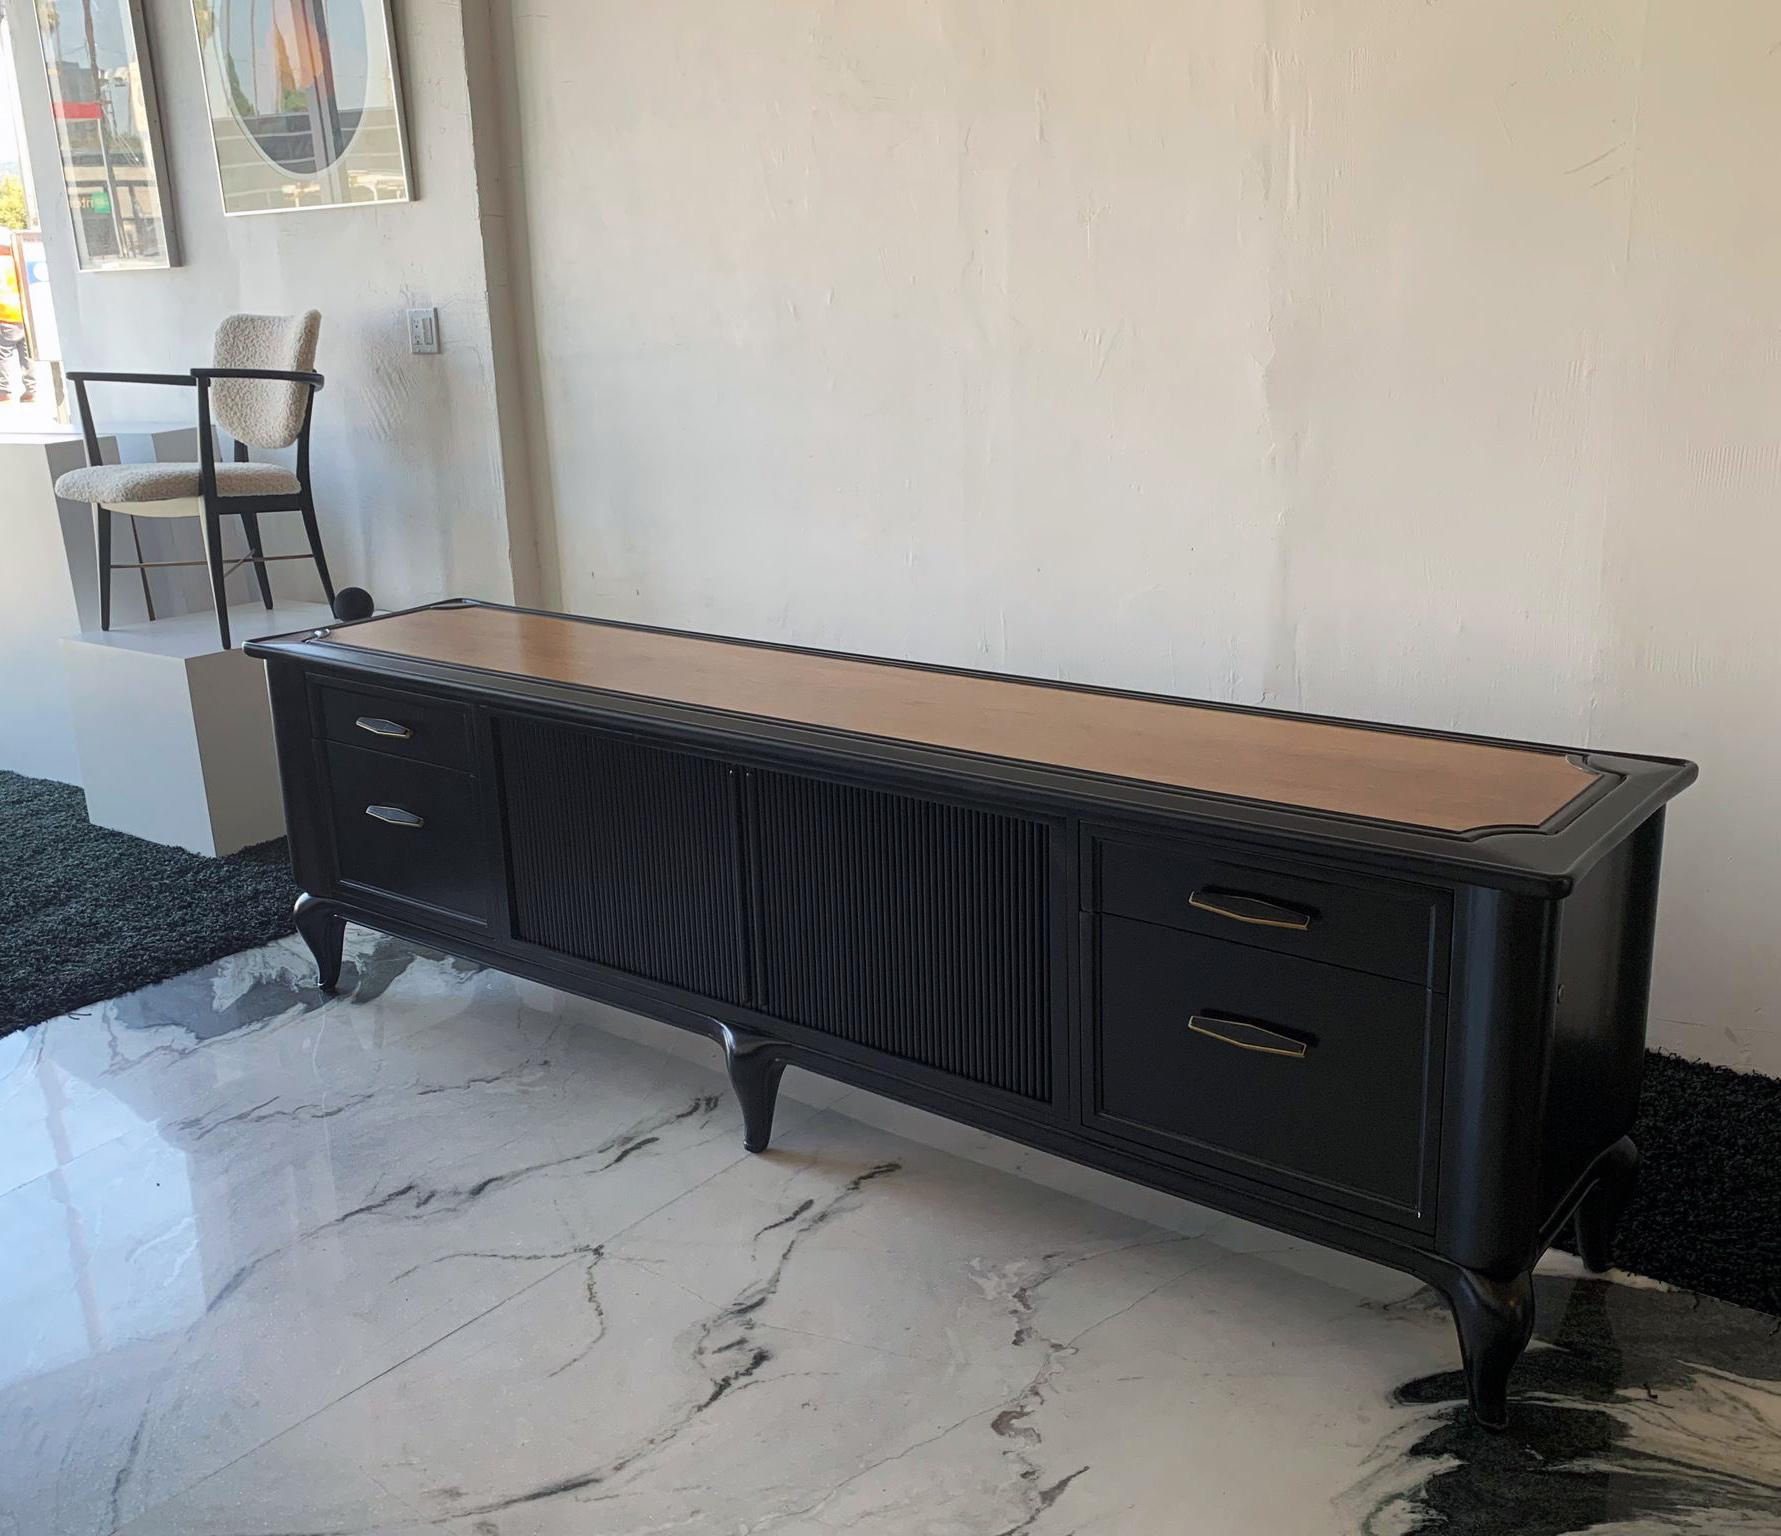 Available right now we have this beautifully refinished monumentally sized credenza or sideboard designed by Maurice Bailey for Monteverdi-Young. Finished and ebonized on all sides, this is a perfect piece to be used in the middle of a room as a